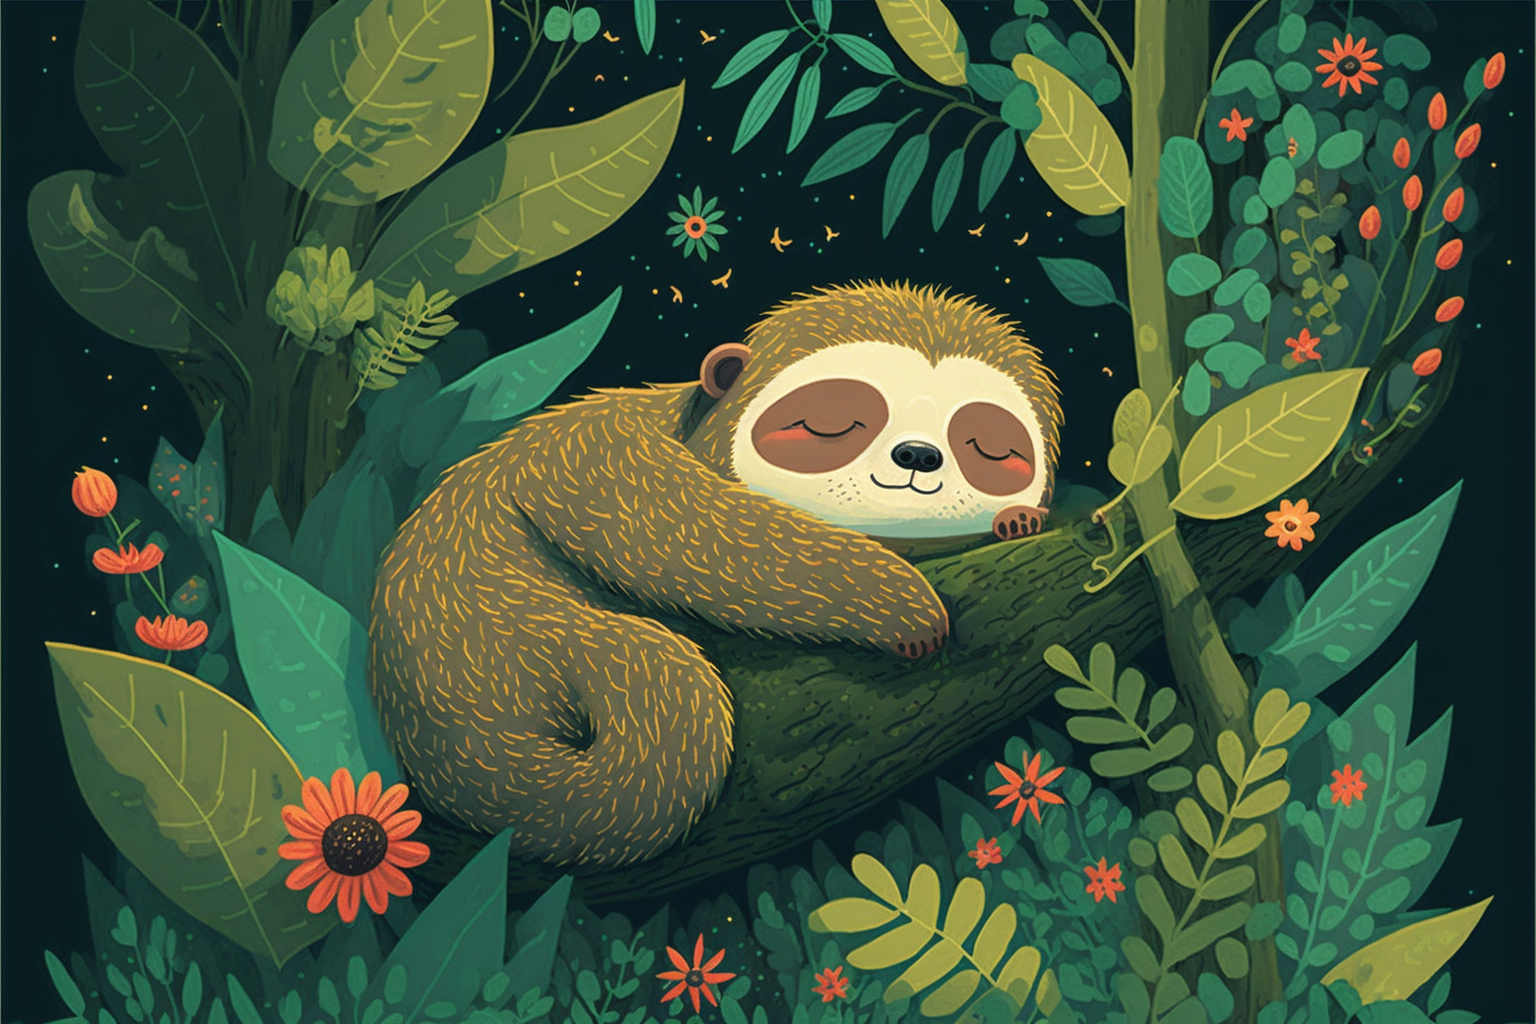 The Sleepy Sloth Who Wanted to Fly